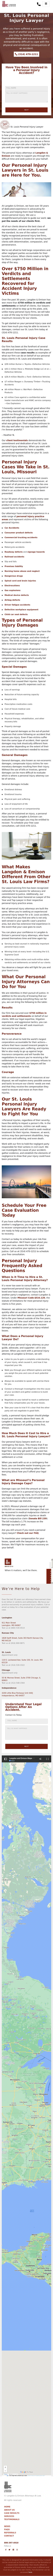 Langdon & Emison Attorneys at Law - St. Louis MO Lawyers